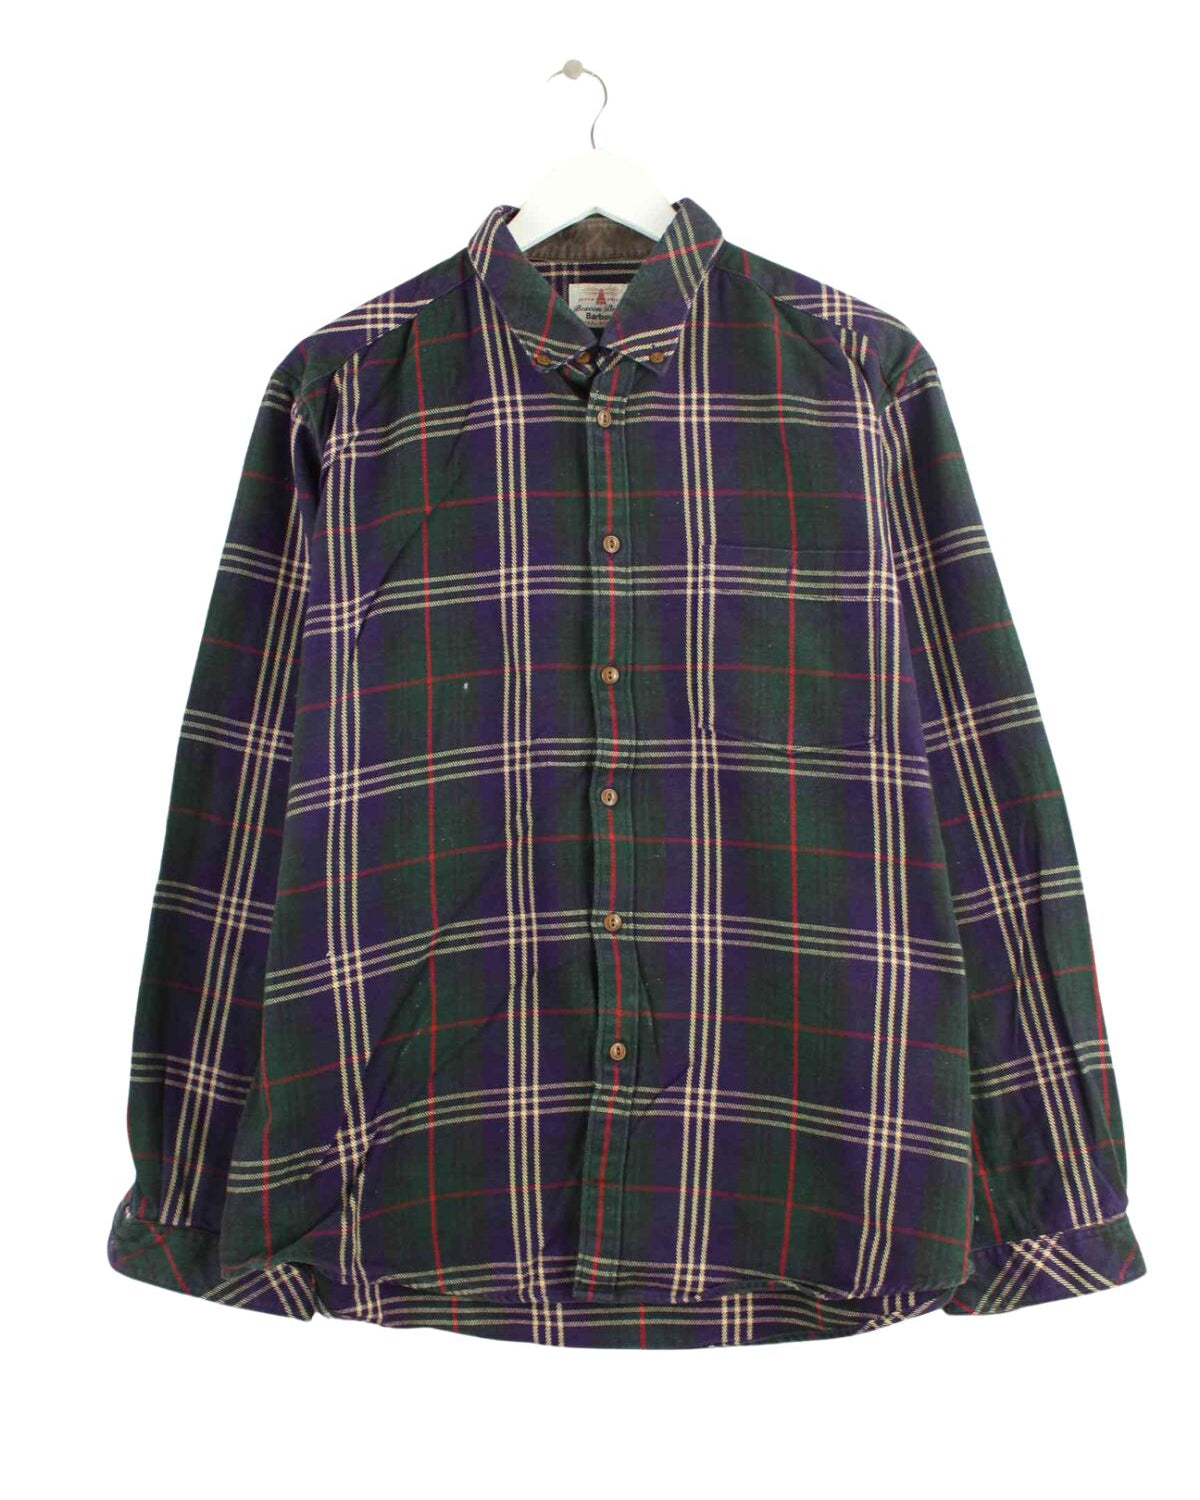 Barbour Flanell Hemd Mehrfarbig XL (front image)